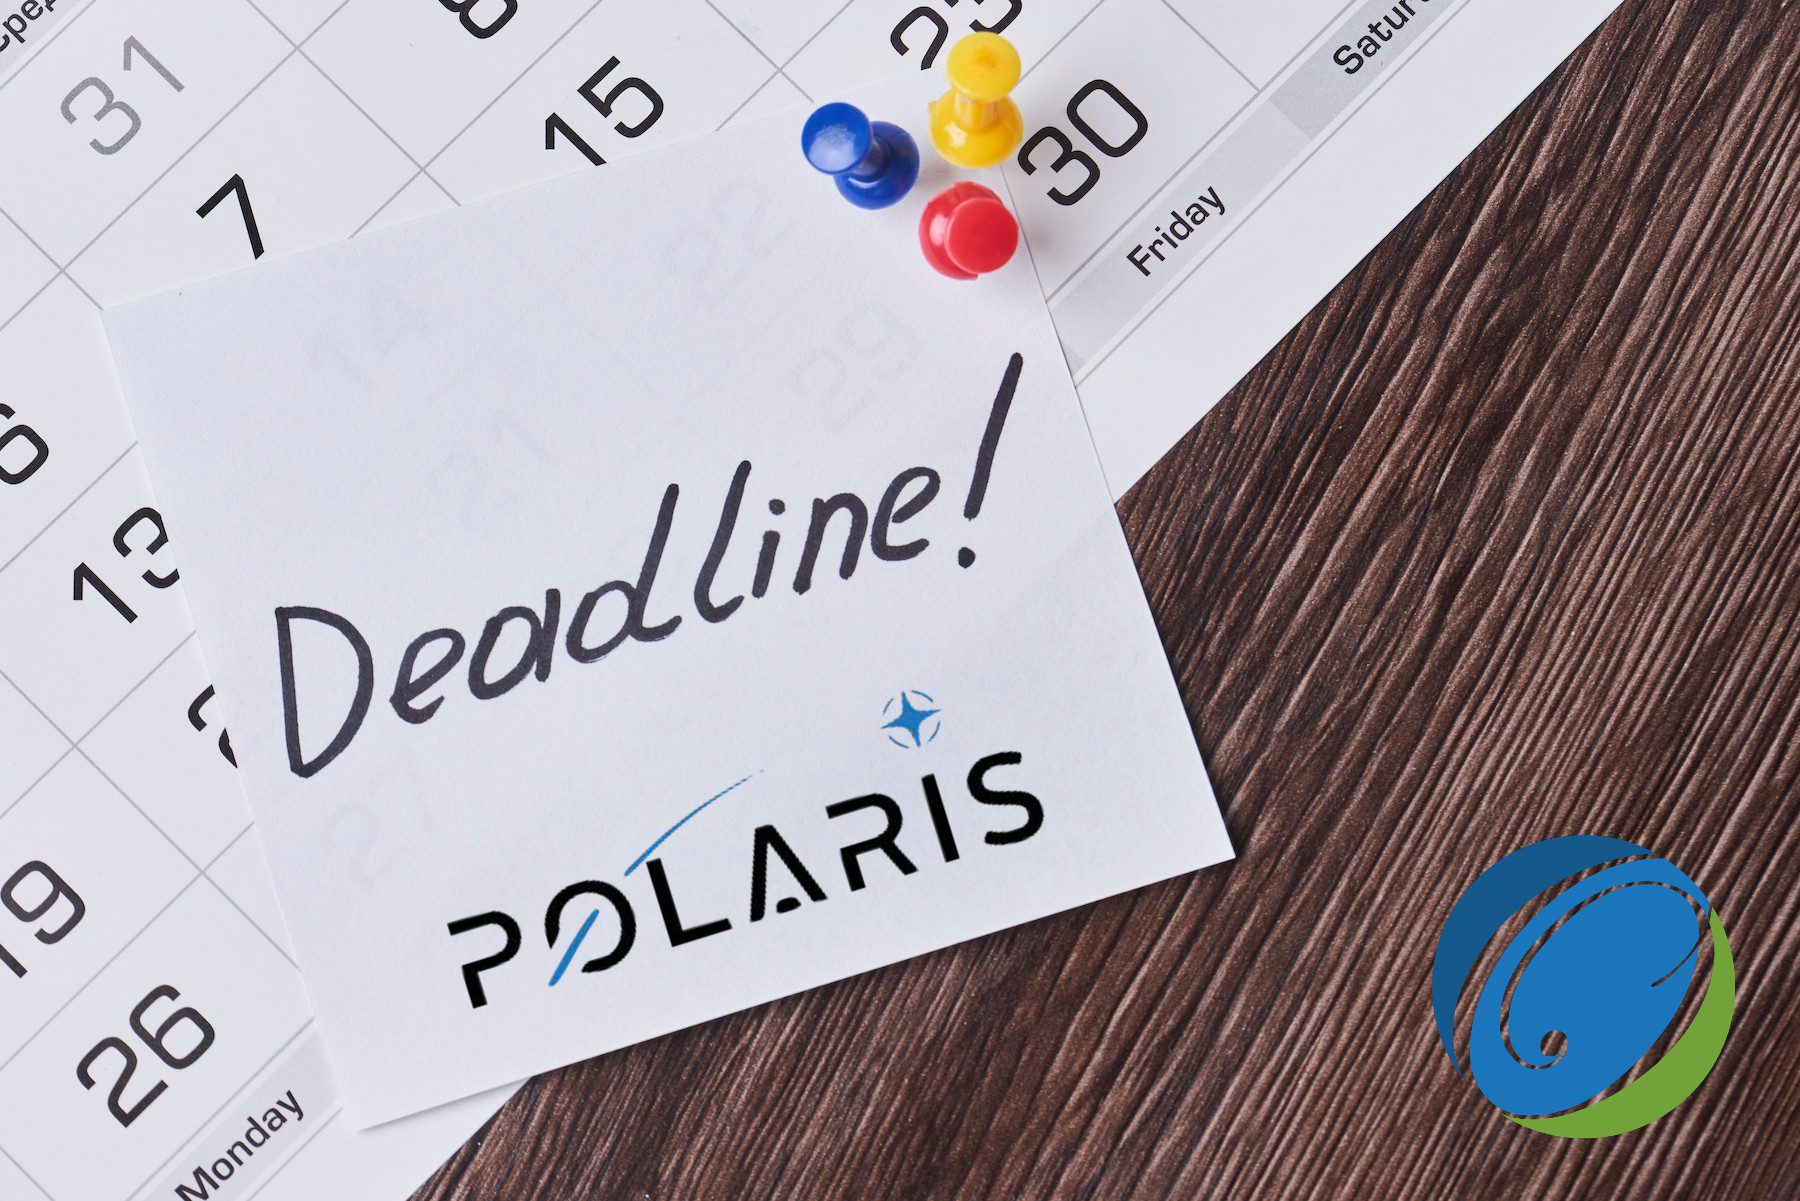 GSA Warns Polaris Bidders to Prepare Early for August 19 Submission